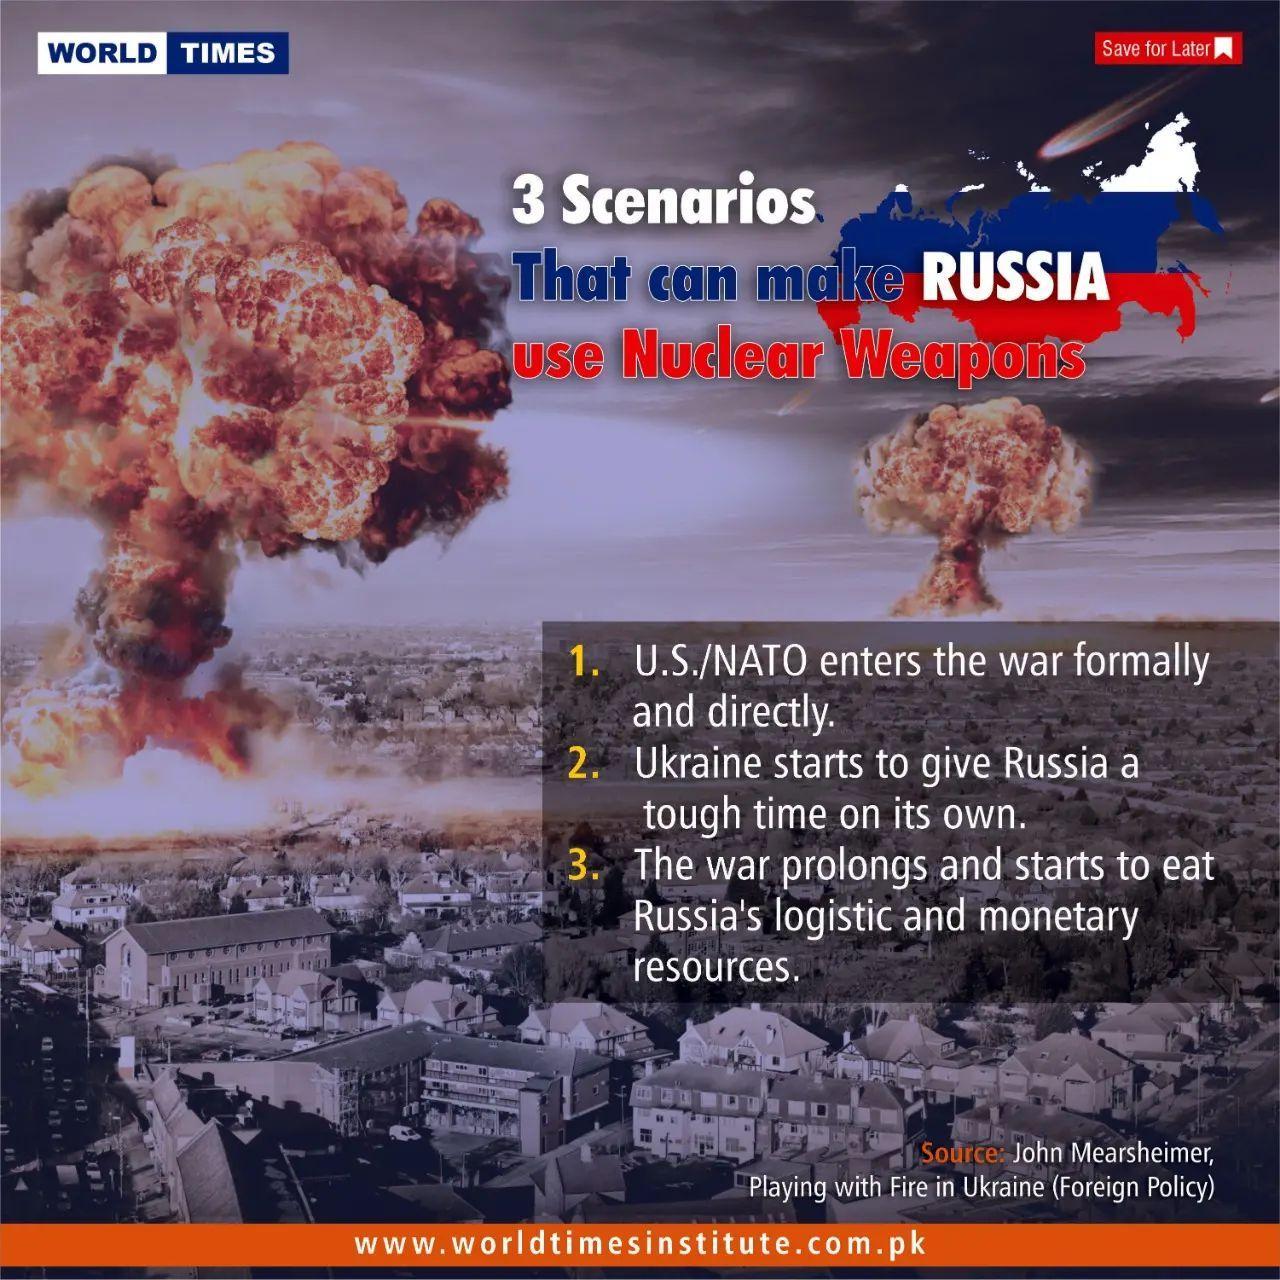 You are currently viewing 3 Scenarios that can make Russia use Nuclear Weapons